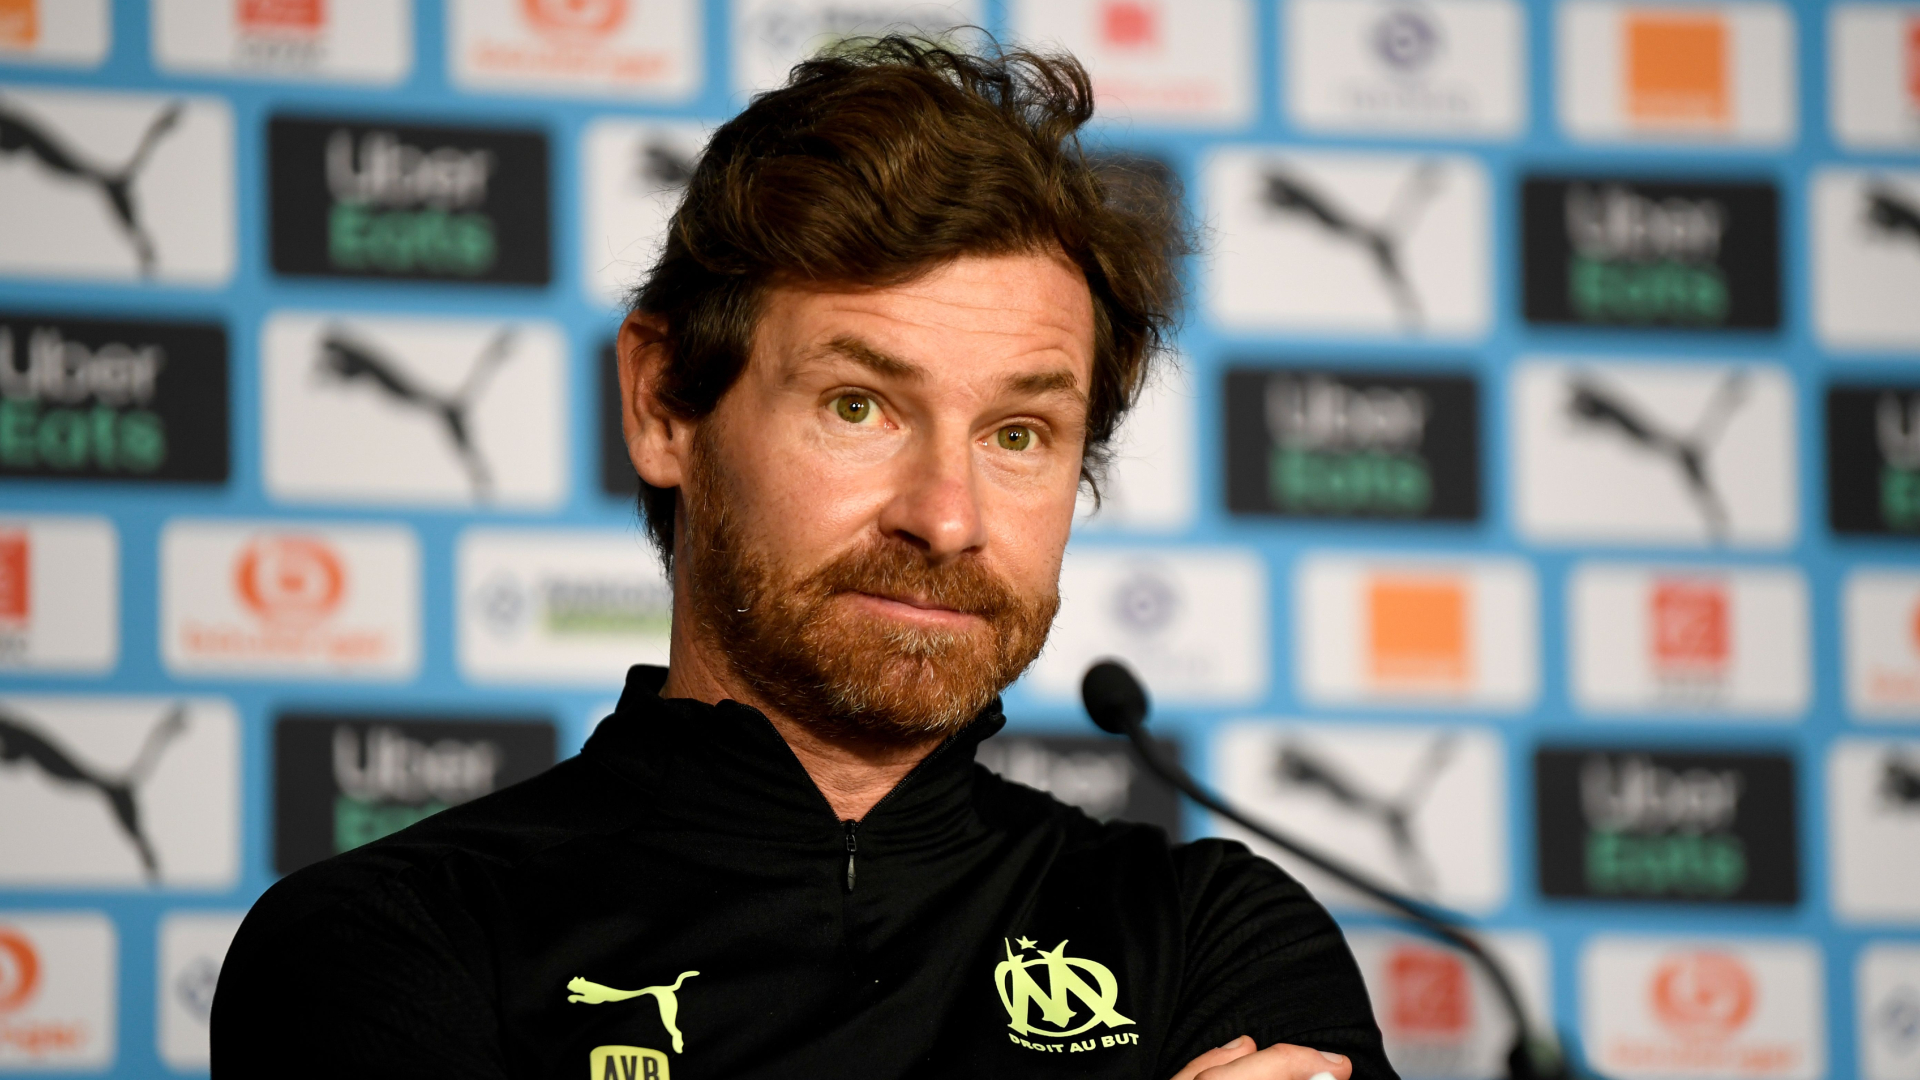 Villas-Boas sensationally offers to resign as Marseille boss due to club signing Ntcham against his wishes